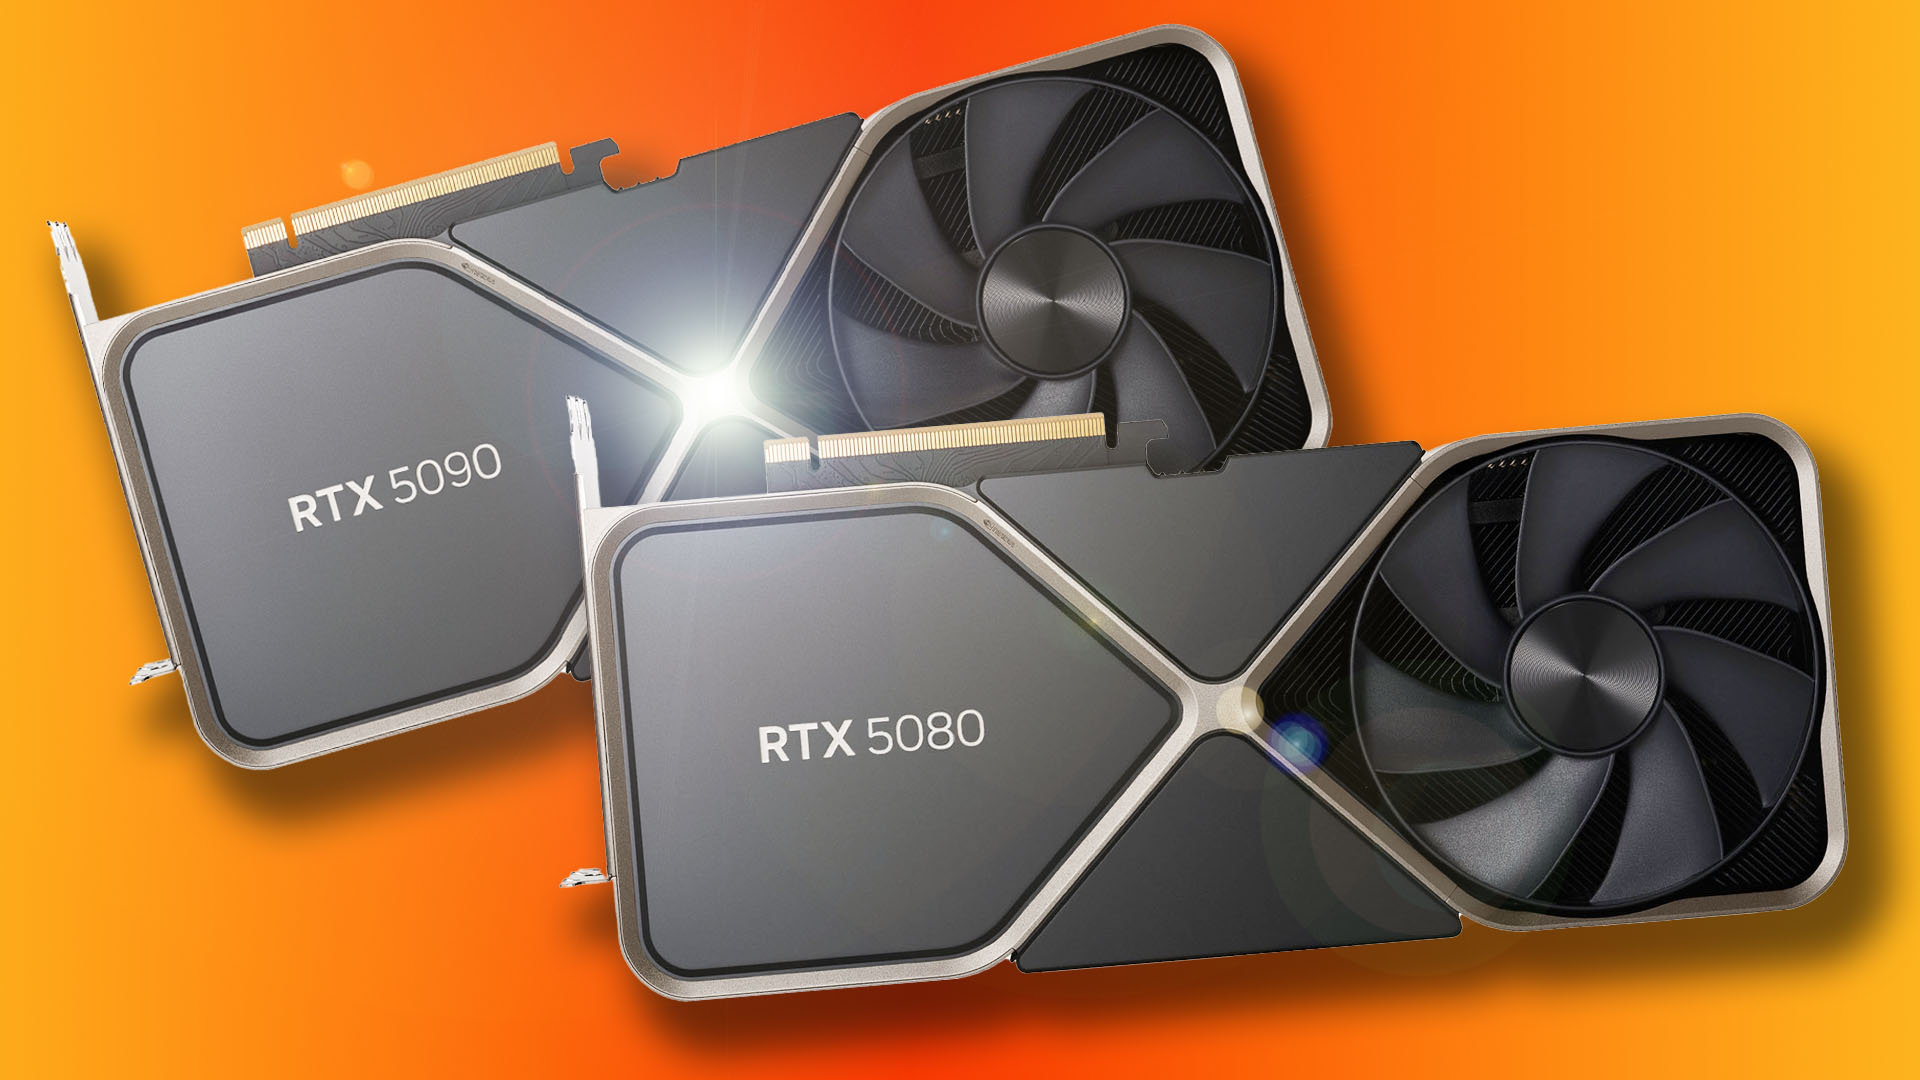 Nvidia RTX 5090 and 5080 will be announced at same time, says leaker